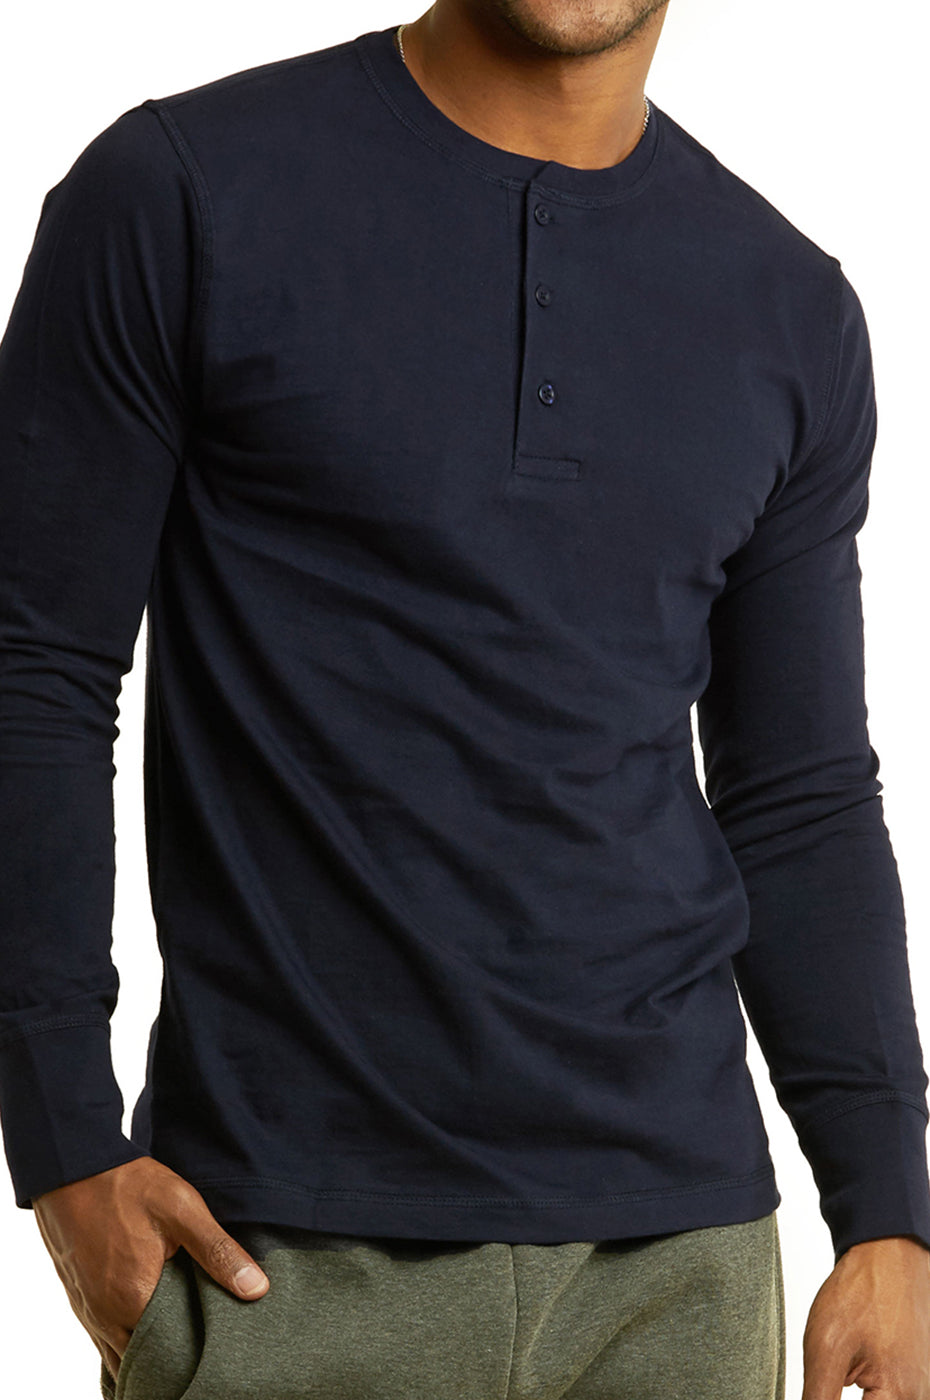 Knocker Men's Long Sleeve 3-Button Classic Athletic Henley Tee Shirts Top (S-3XL)